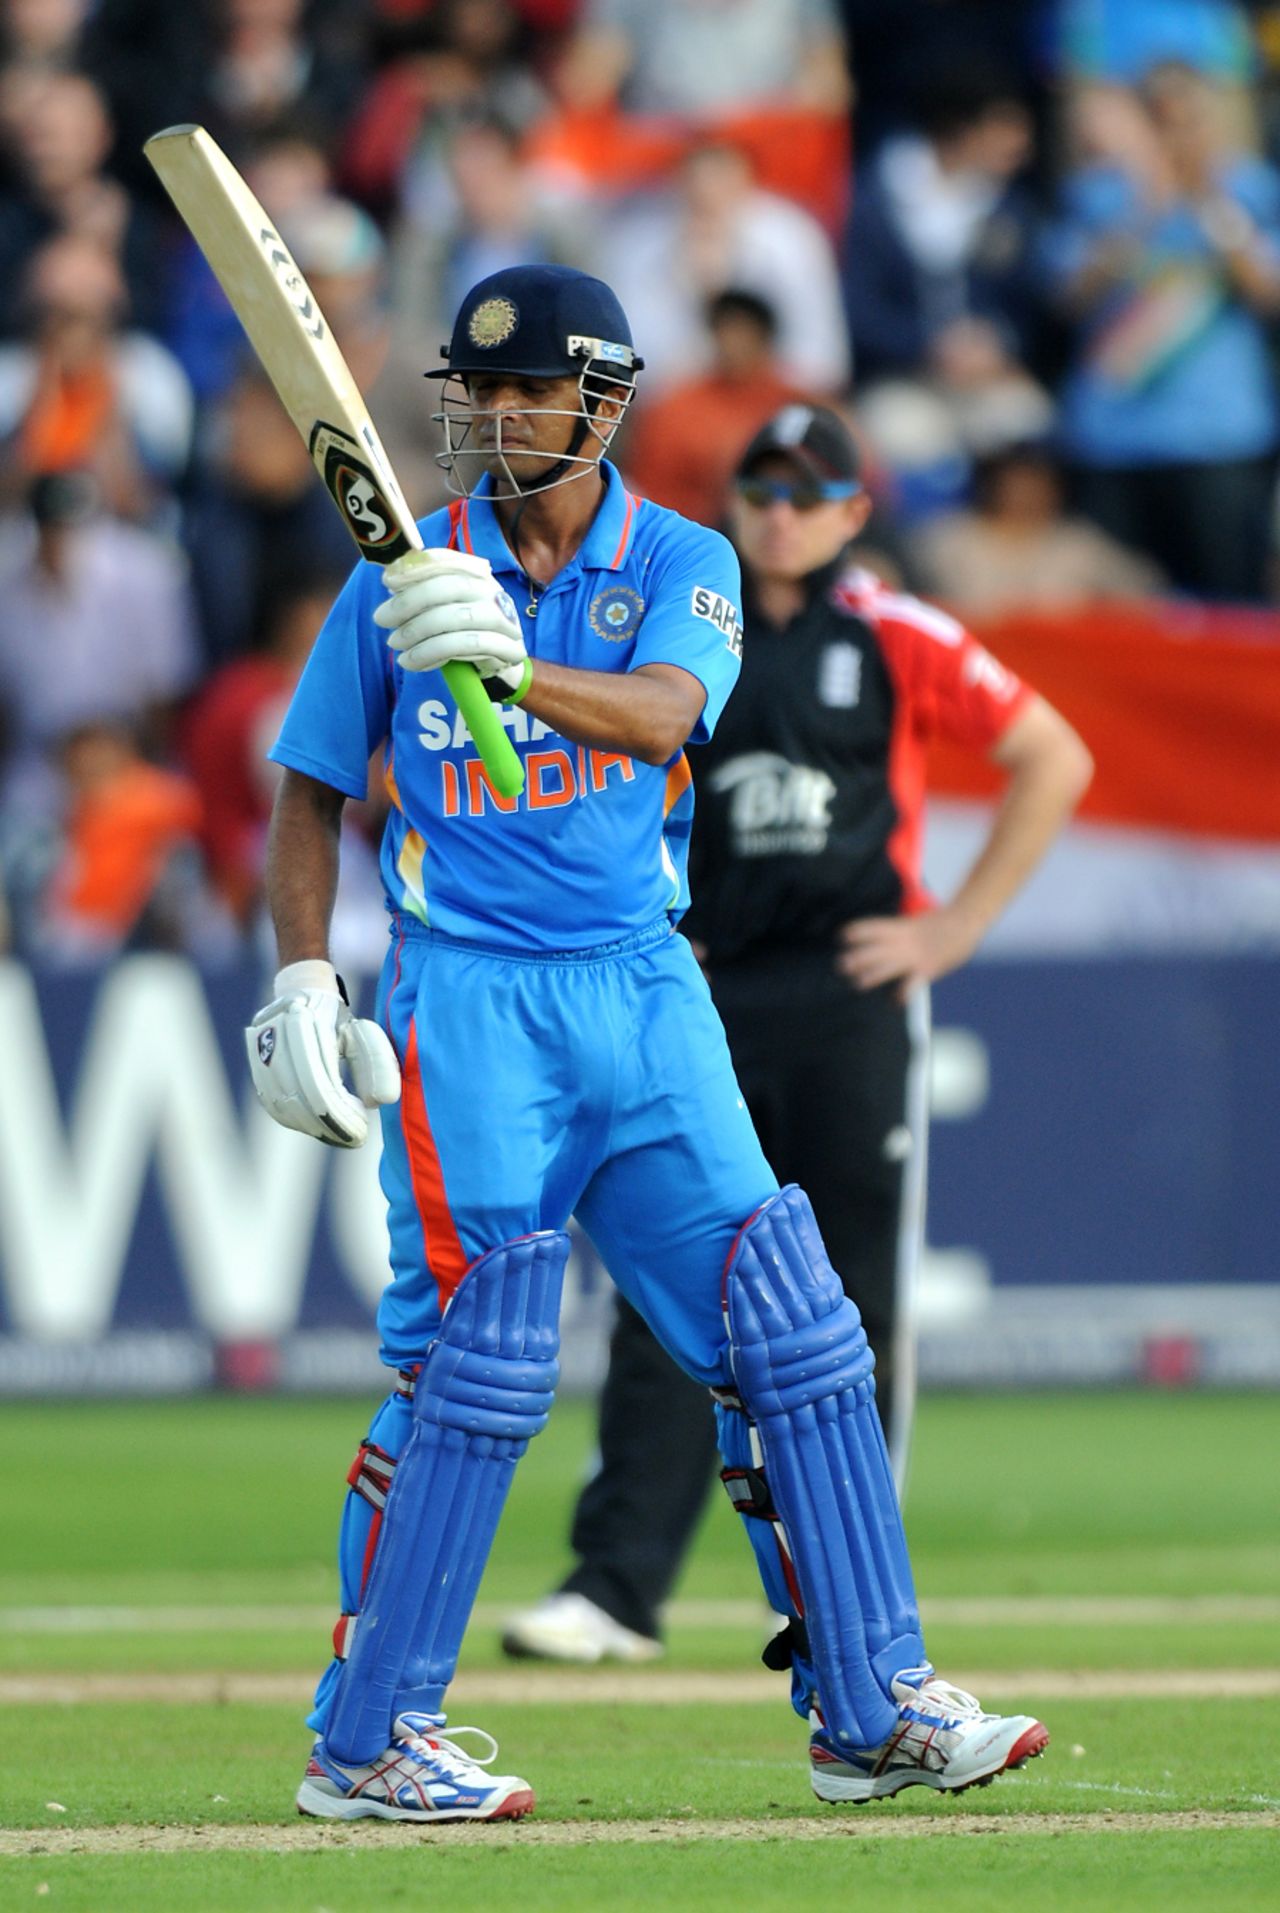 Rahul Dravid acknowledges the applause as he passes fifty in his final ODI, England v India, 5th ODI, Cardiff, September 16, 2011